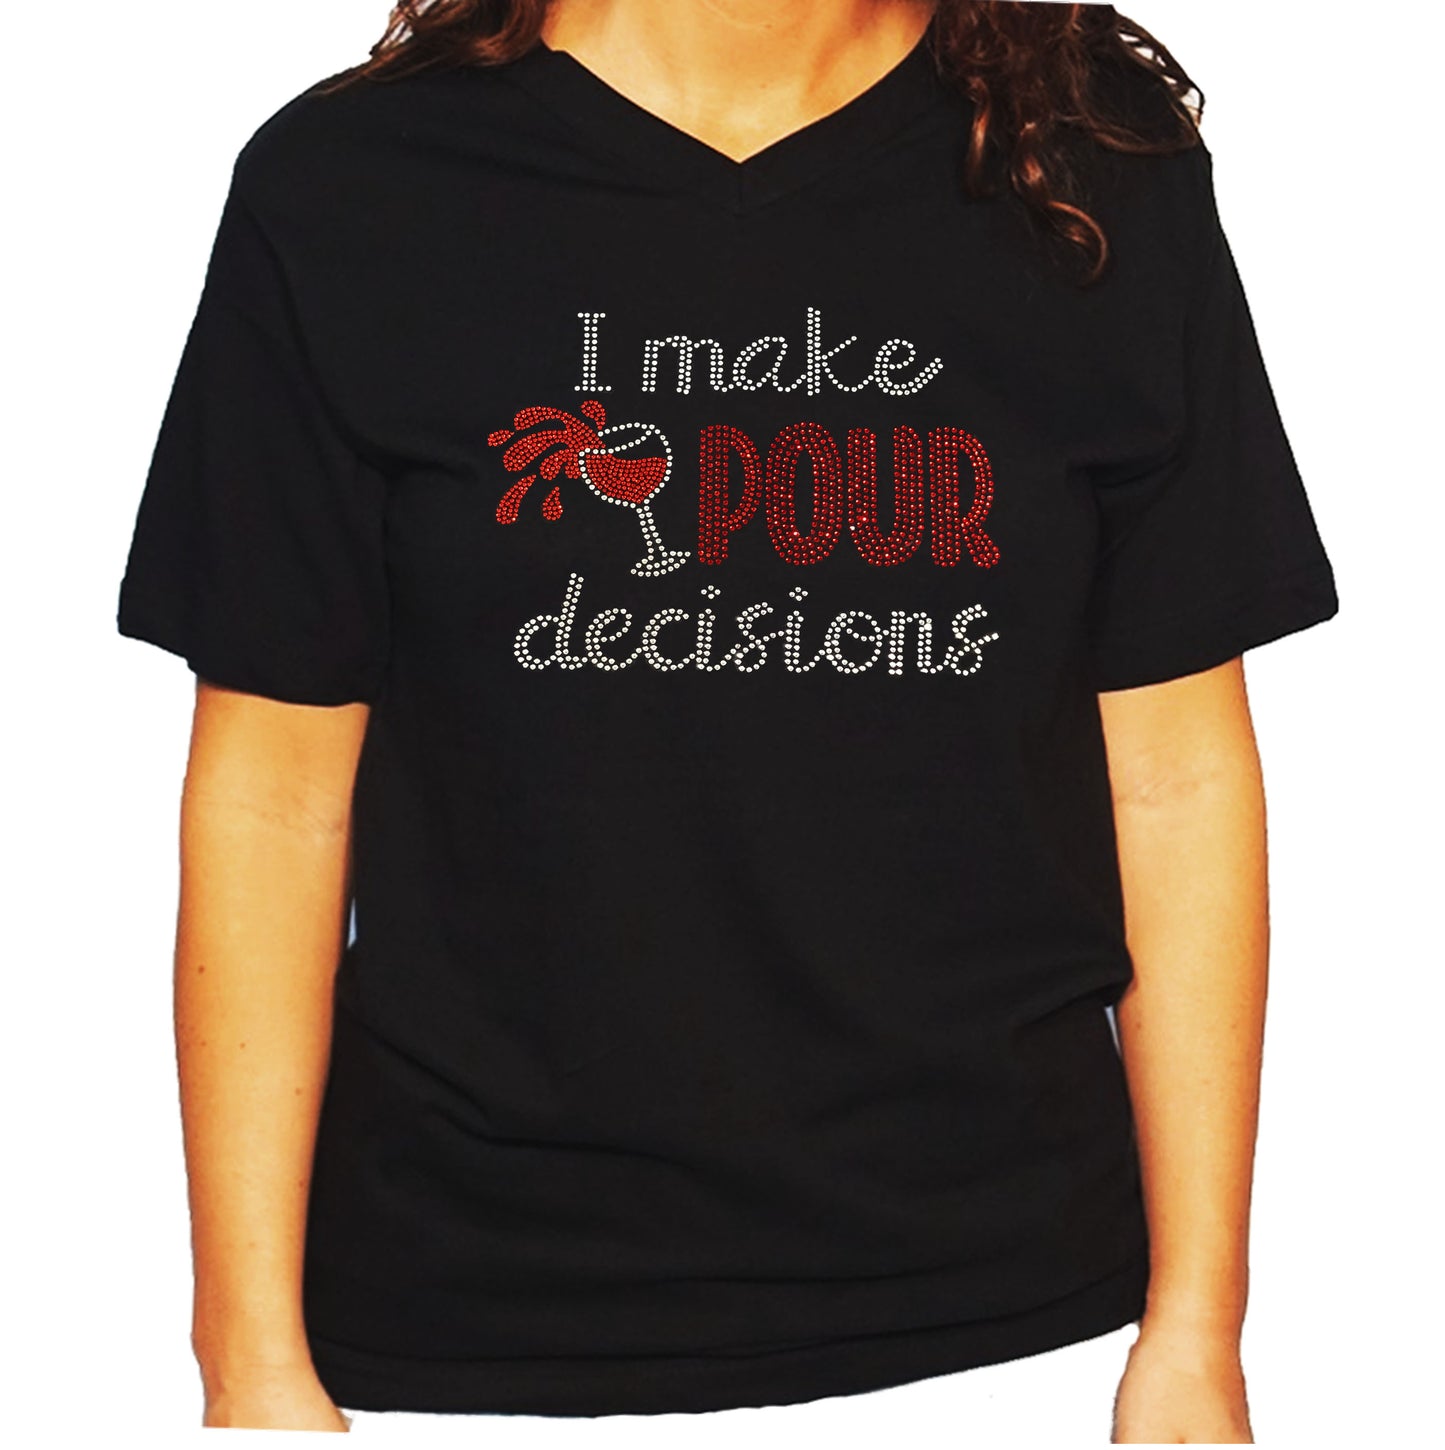 Women's / Unisex T-Shirt with I Make Pour Decisions Wine Cup in Rhinestones